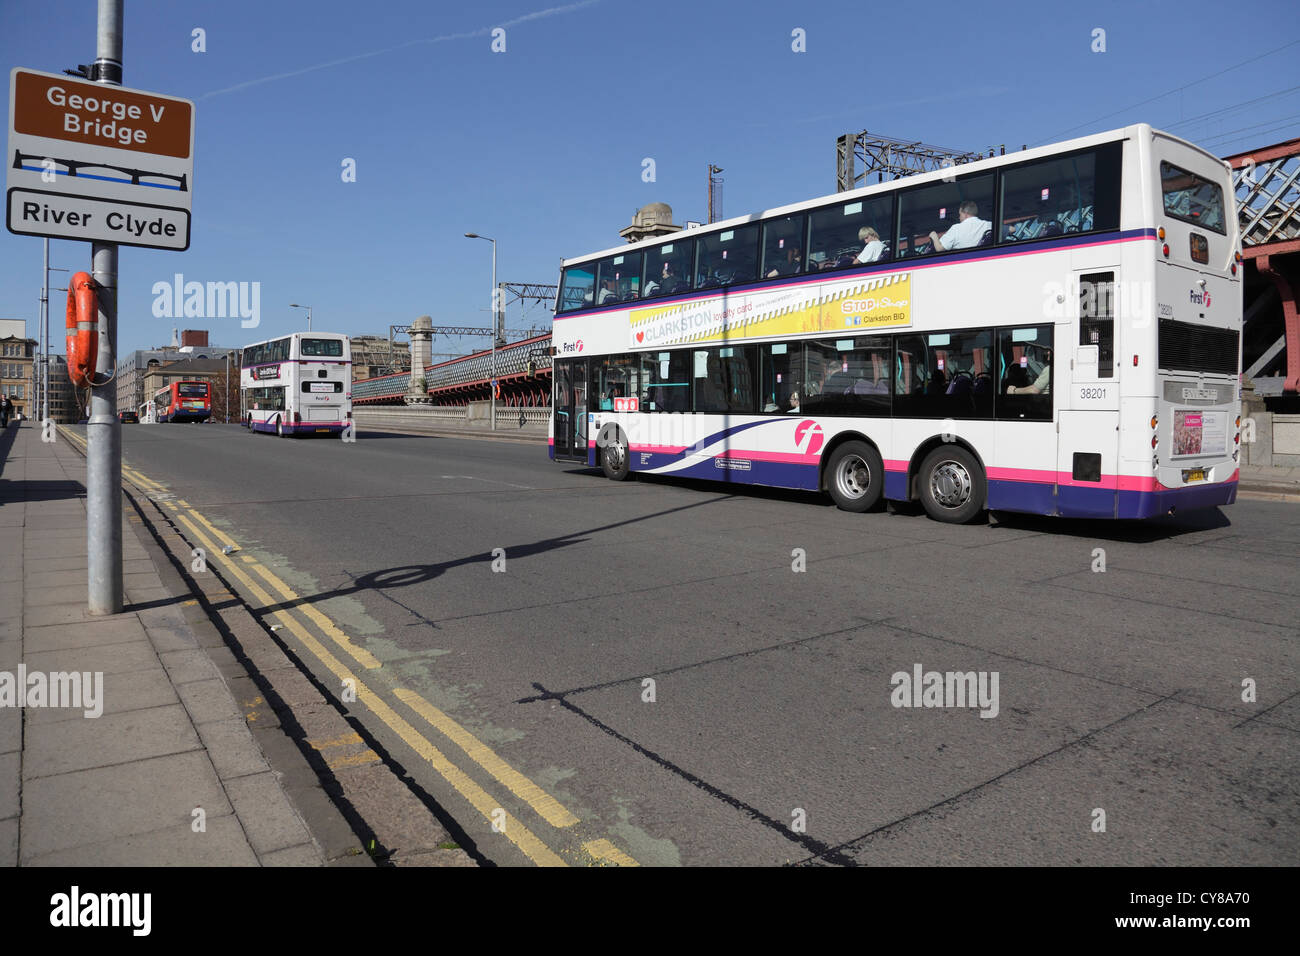 Looking North to buses crossing George V Bridge on Commerce Street over the River Clyde to Glasgow city centre, Scotland, UK Stock Photo